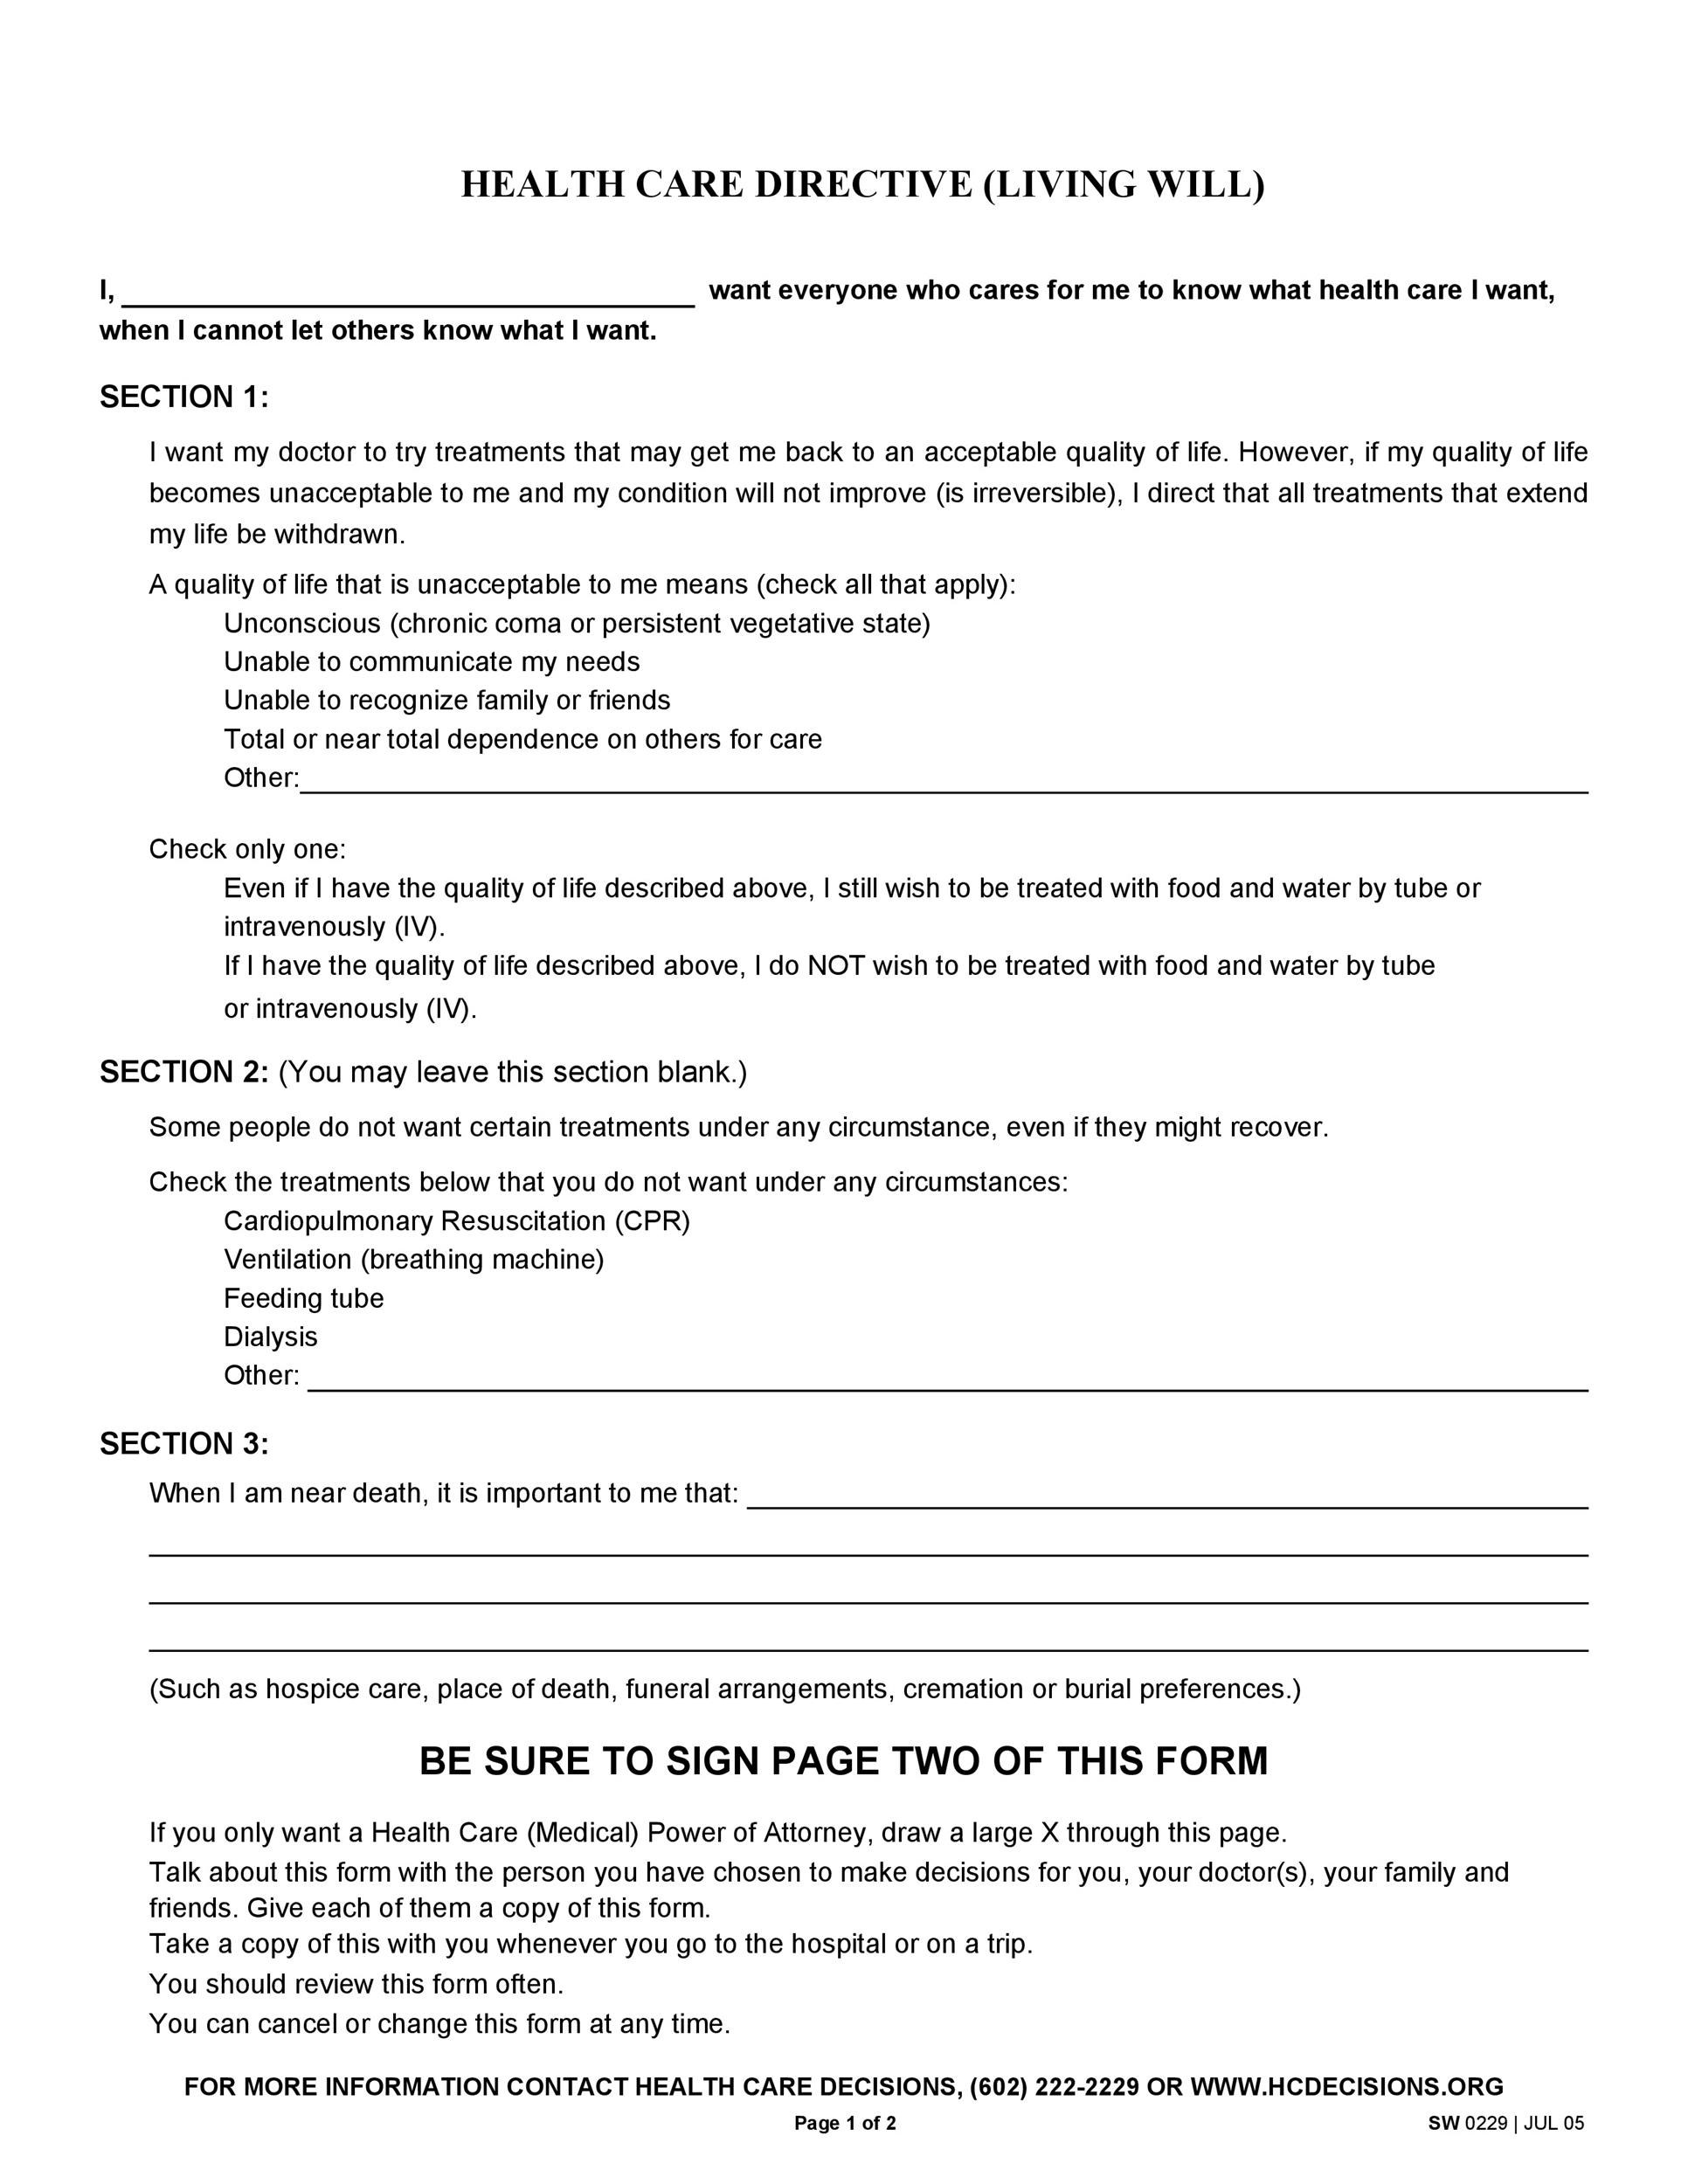 50 Free Living Will Templates Forms ALL STATES TemplateLab